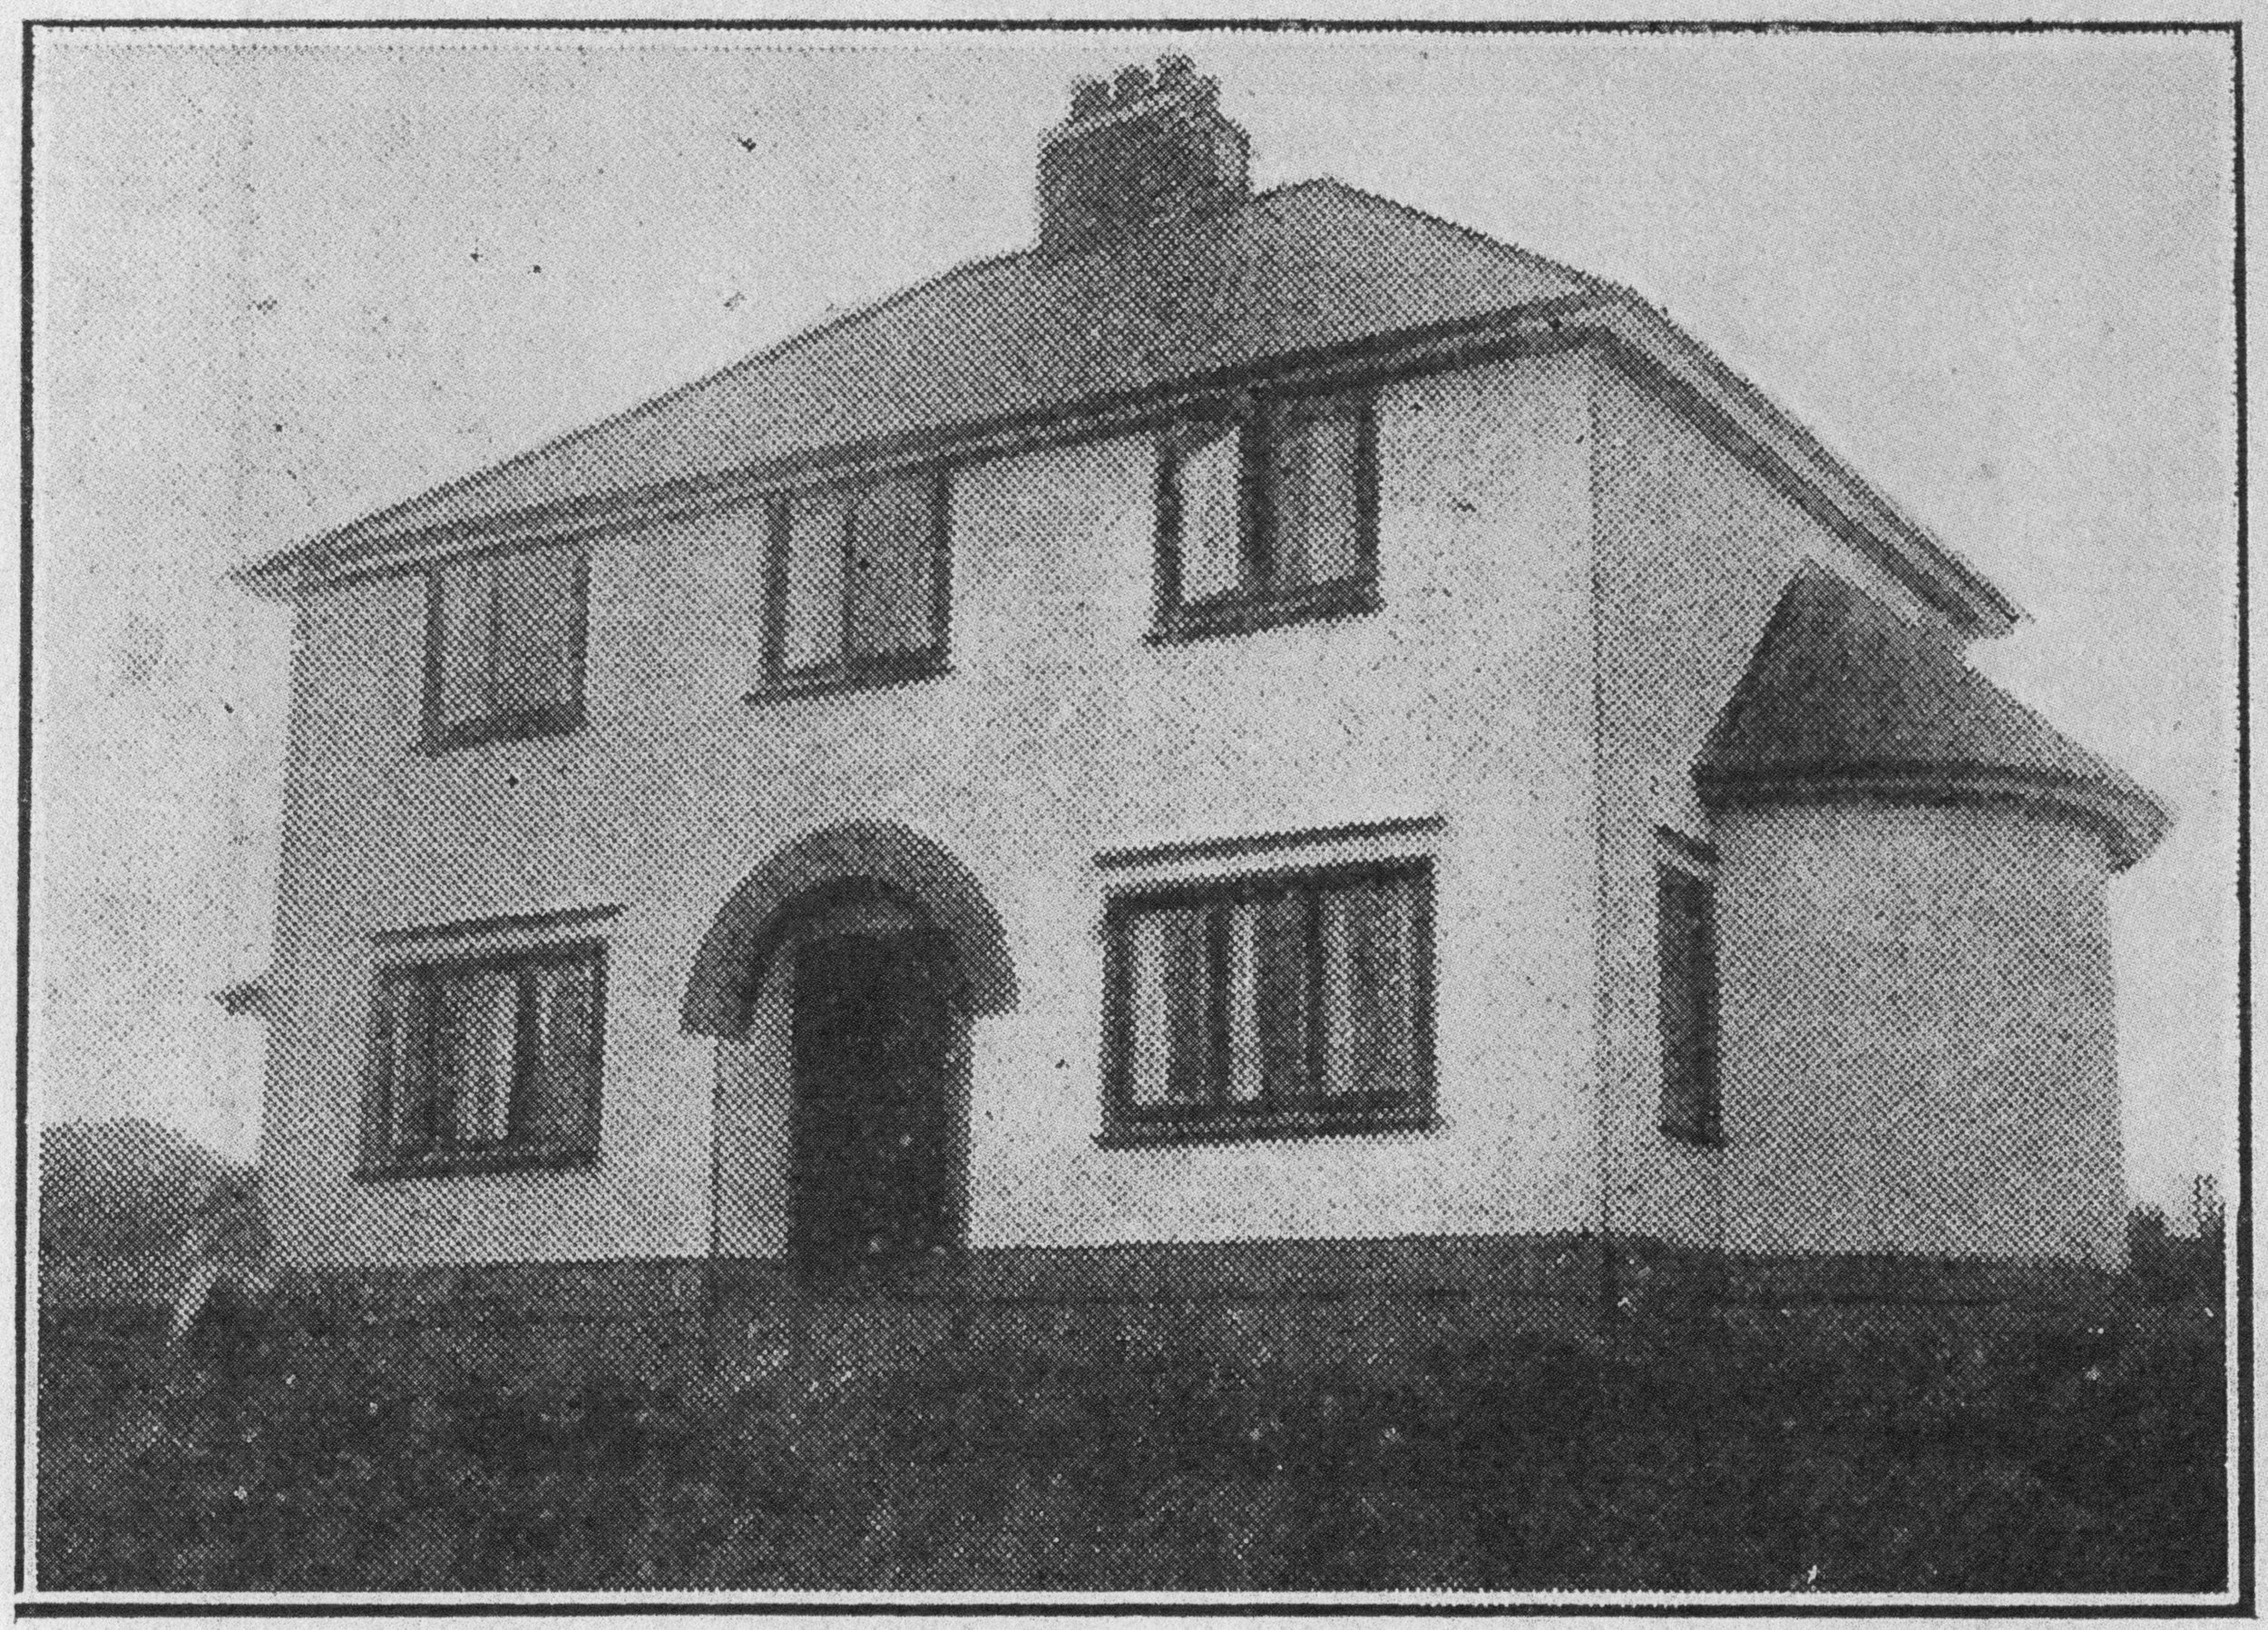 Family house by Florence Fulton Hobson, Ireland